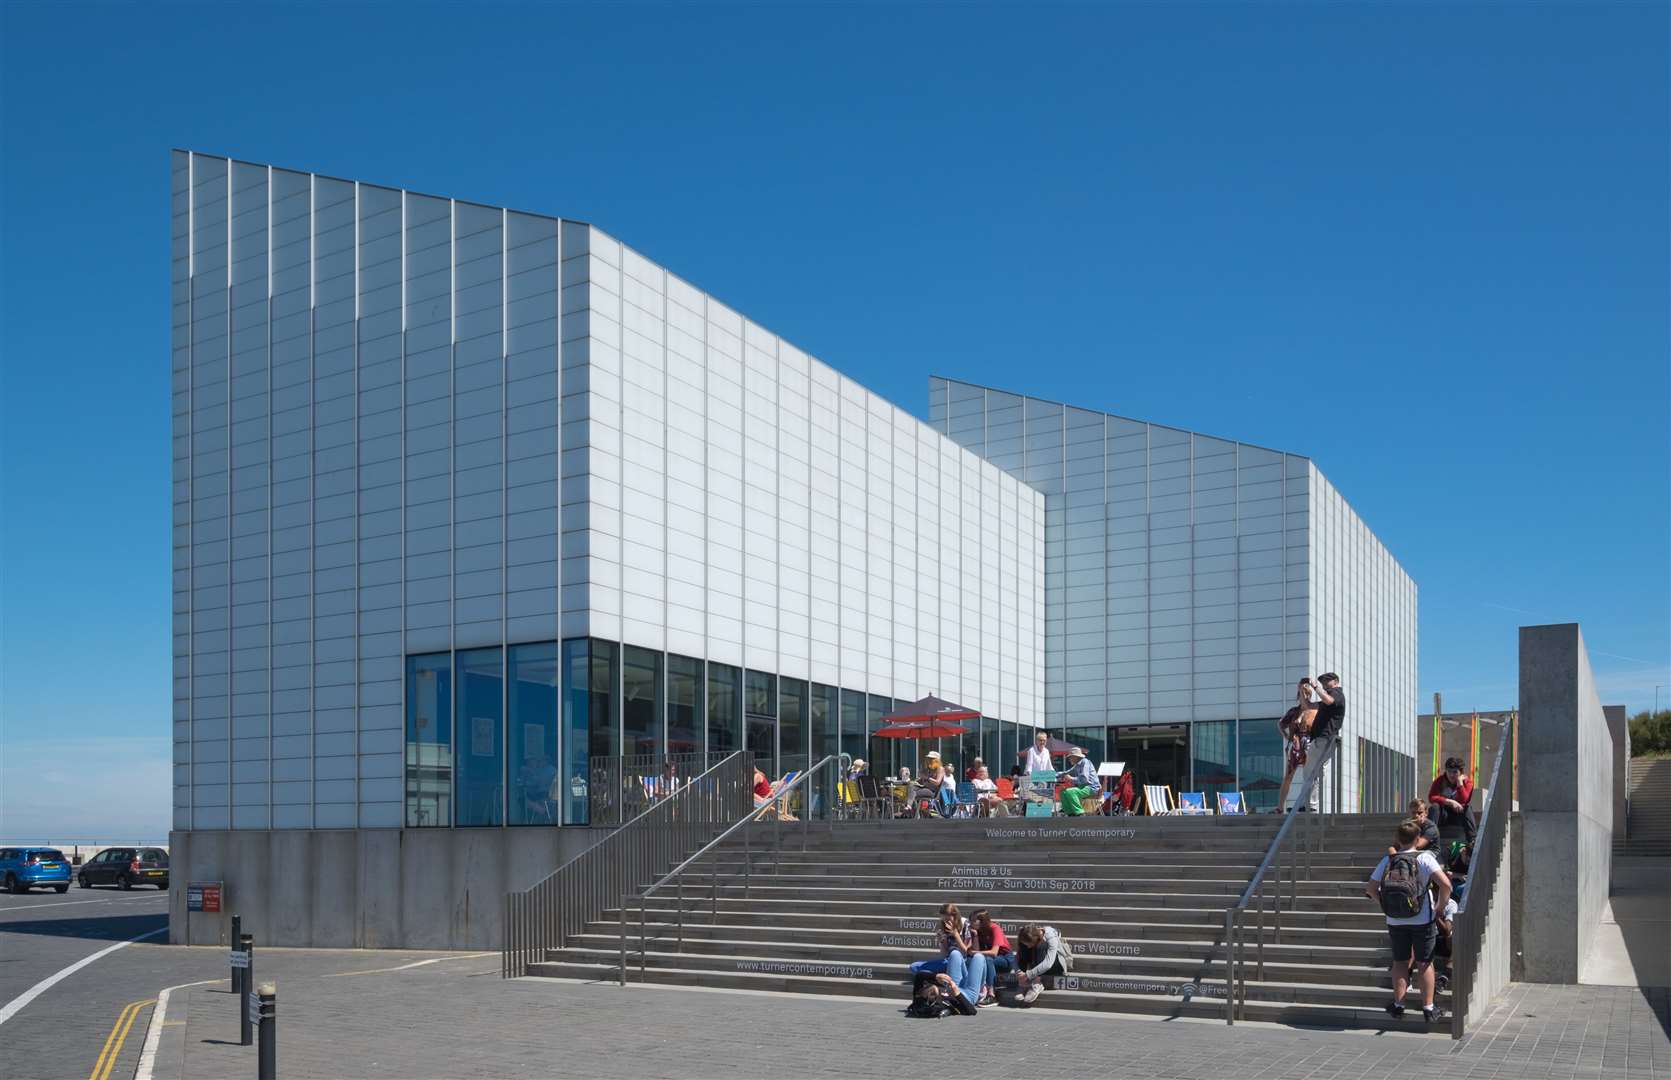 The Turner Contemporary is one of three arts facilities to receive a cash boost